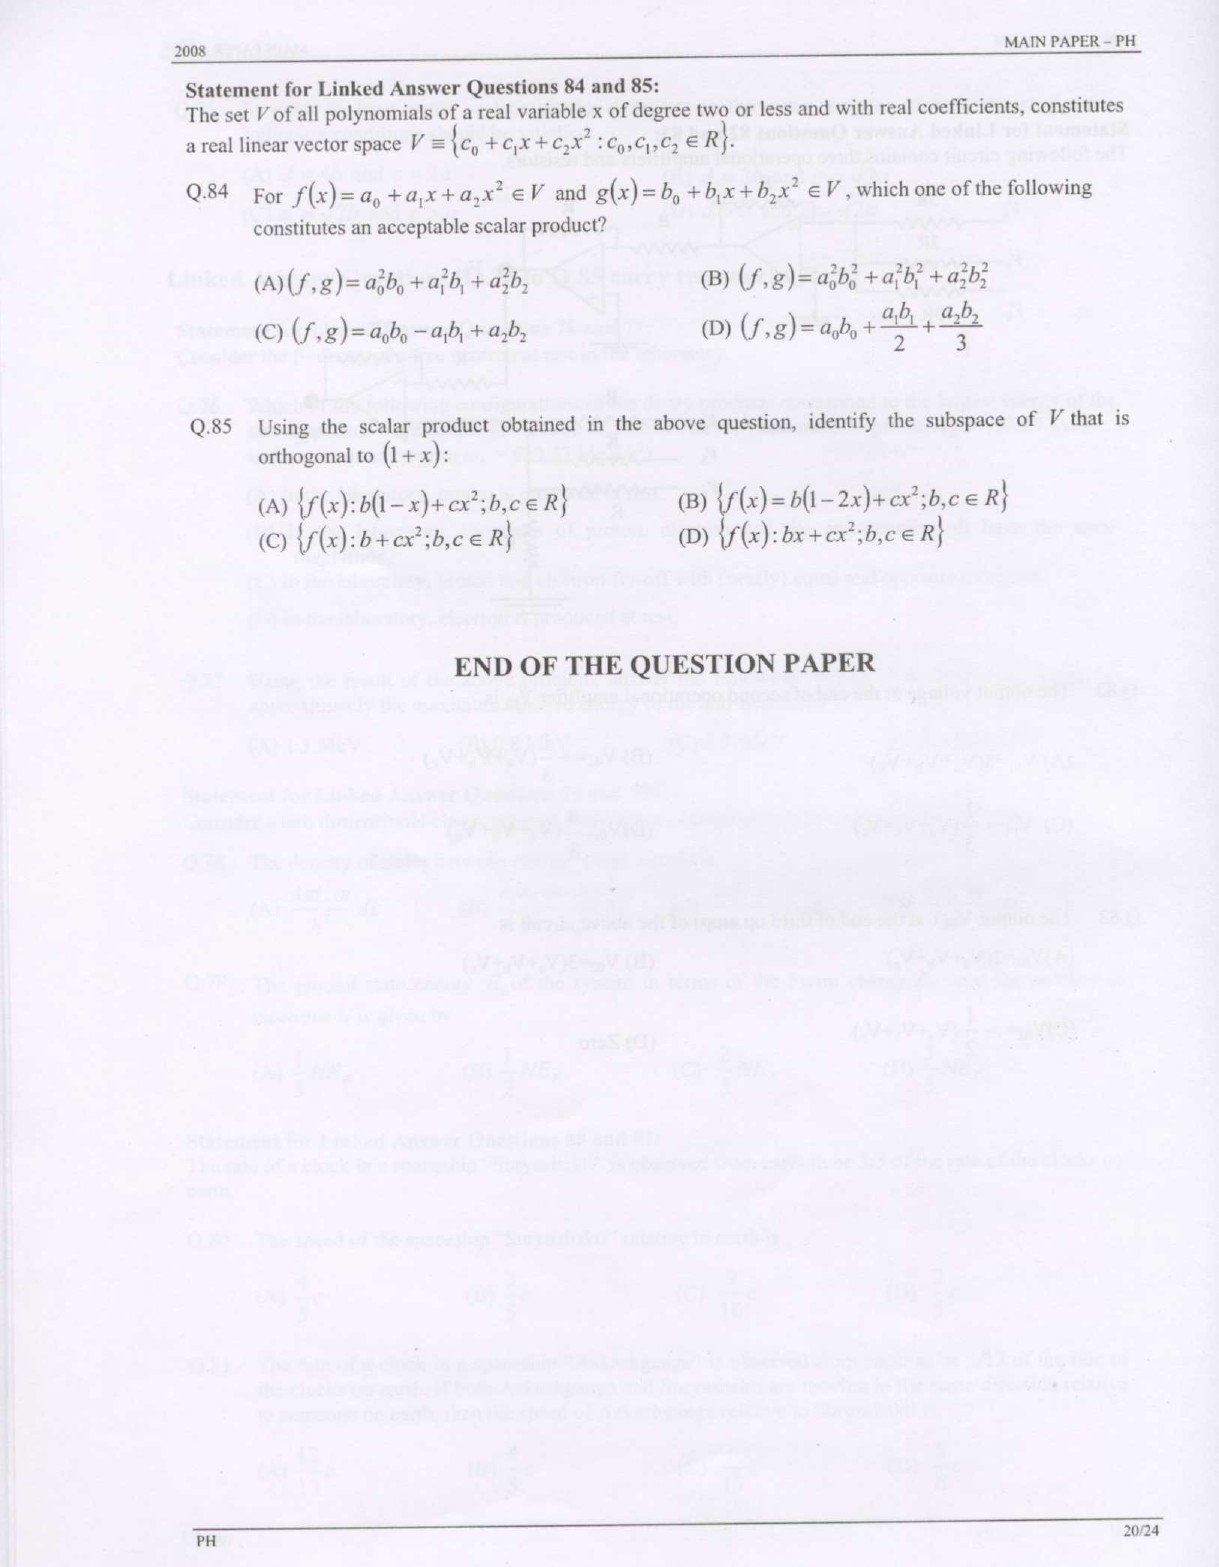 GATE Exam Question Paper 2008 Physics 20